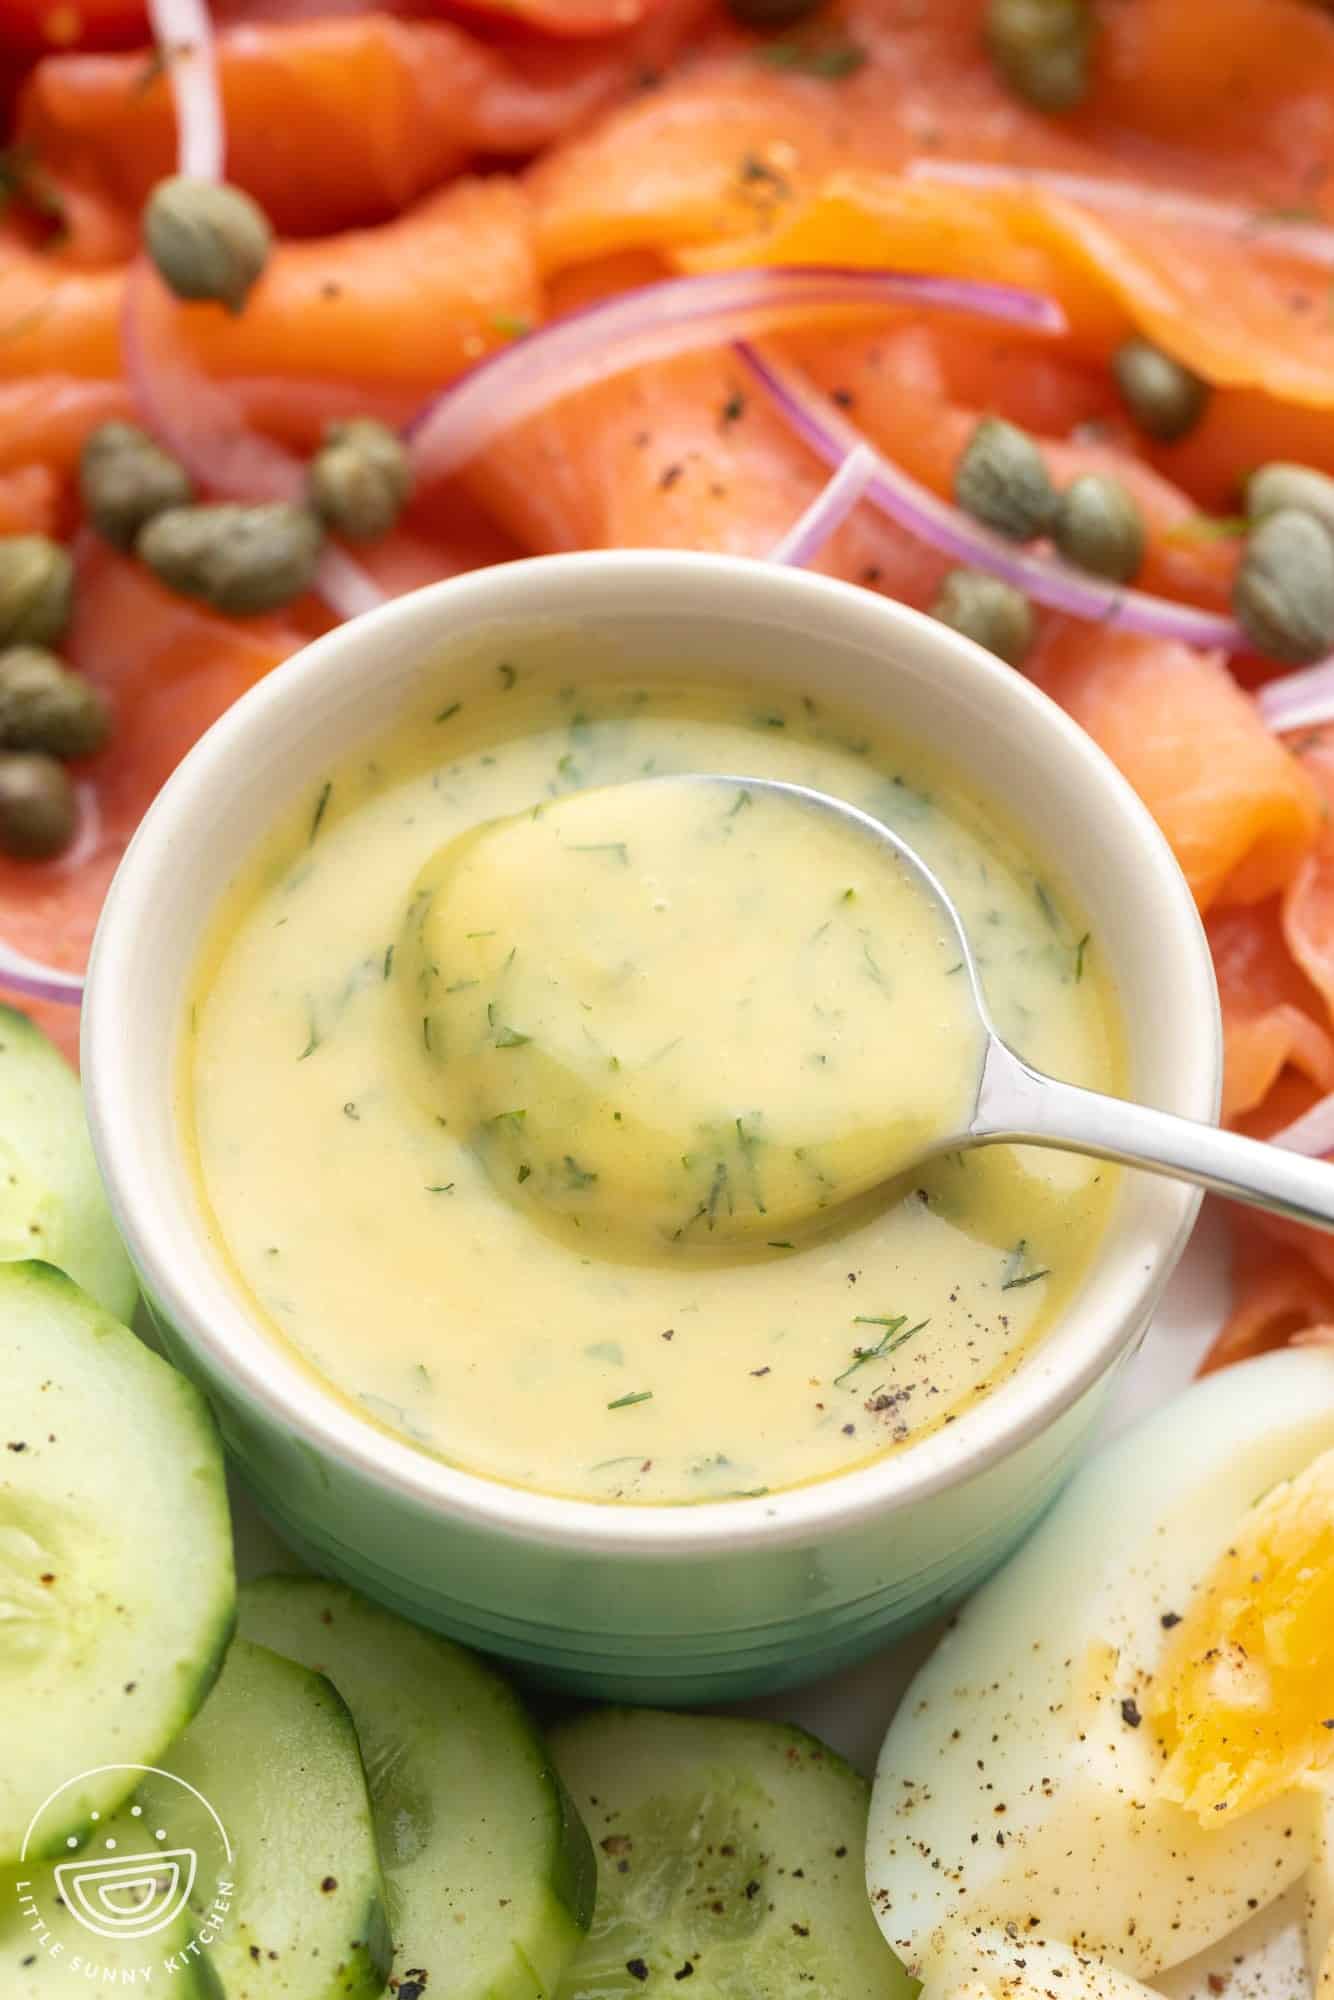 Creamy dill mustard sauce in a small bowl with a spoon